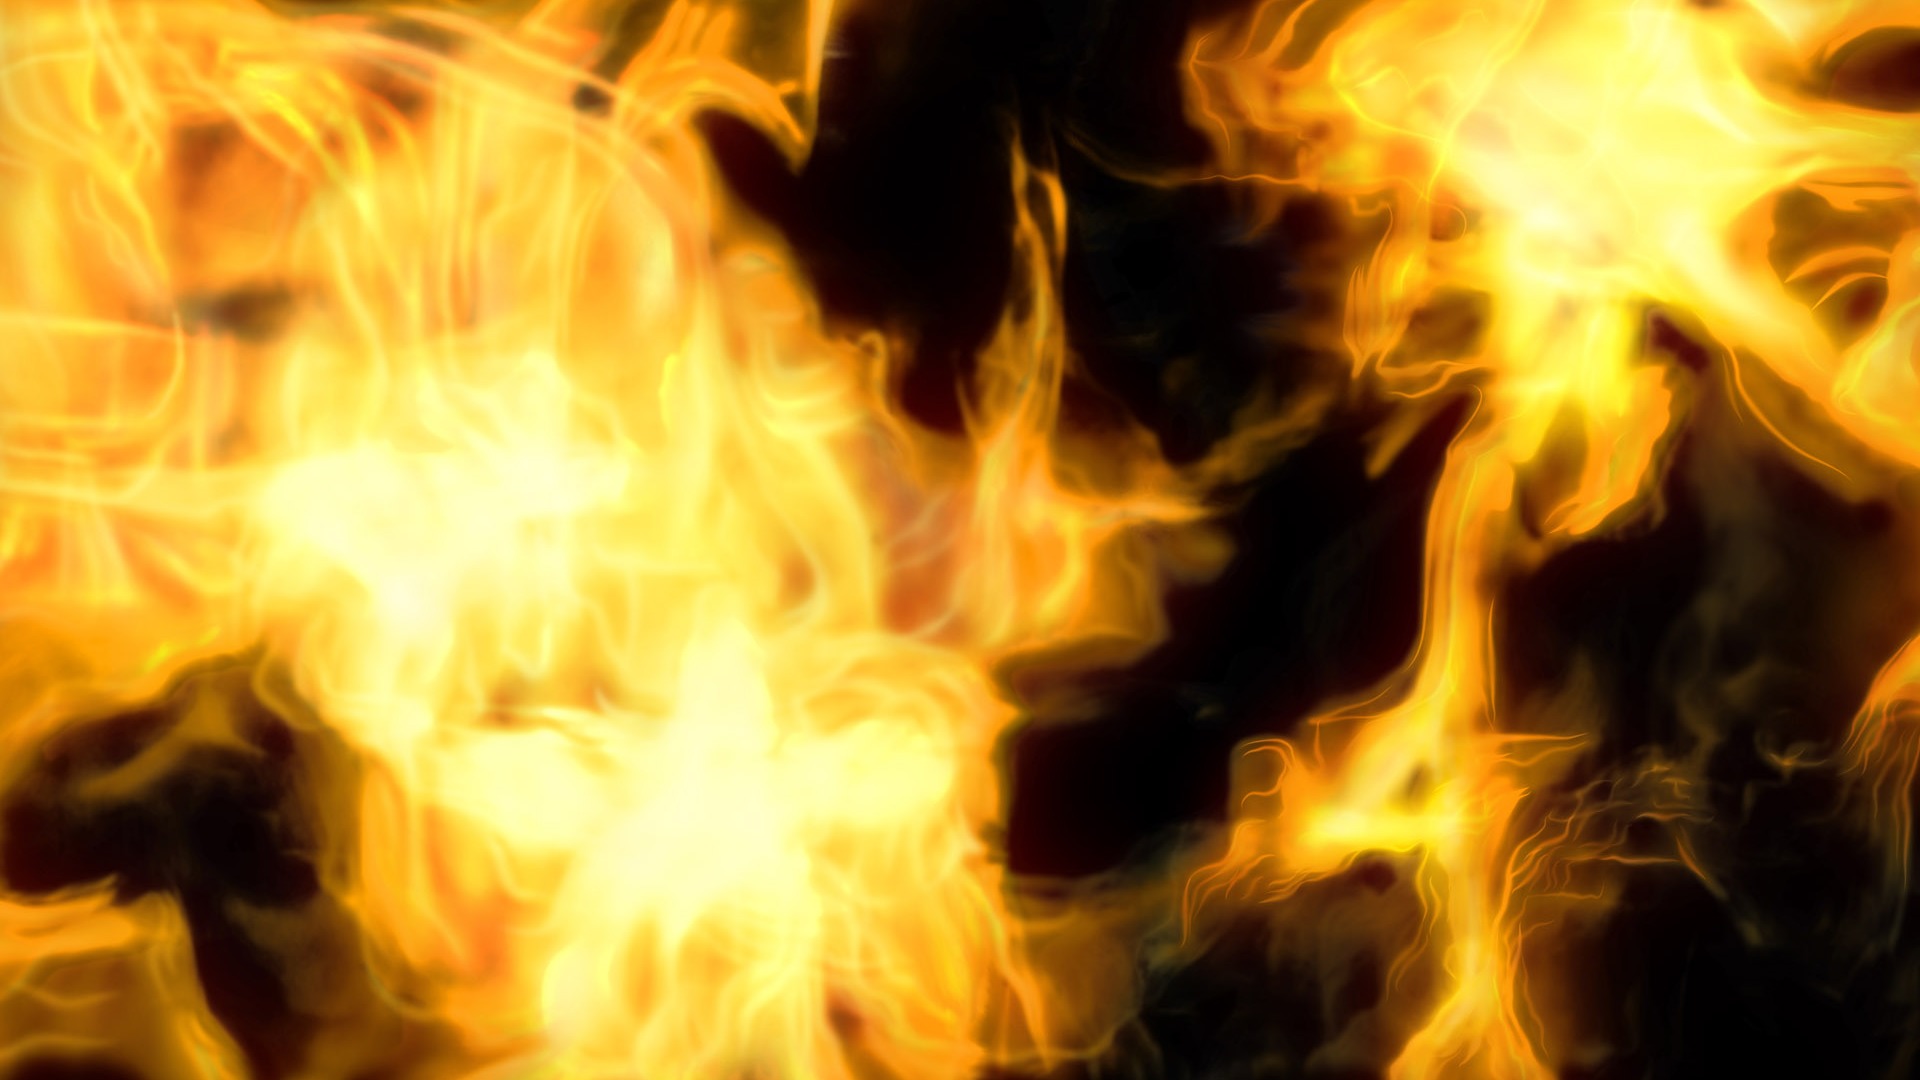 Flame Feature HD Wallpaper #16 - 1920x1080